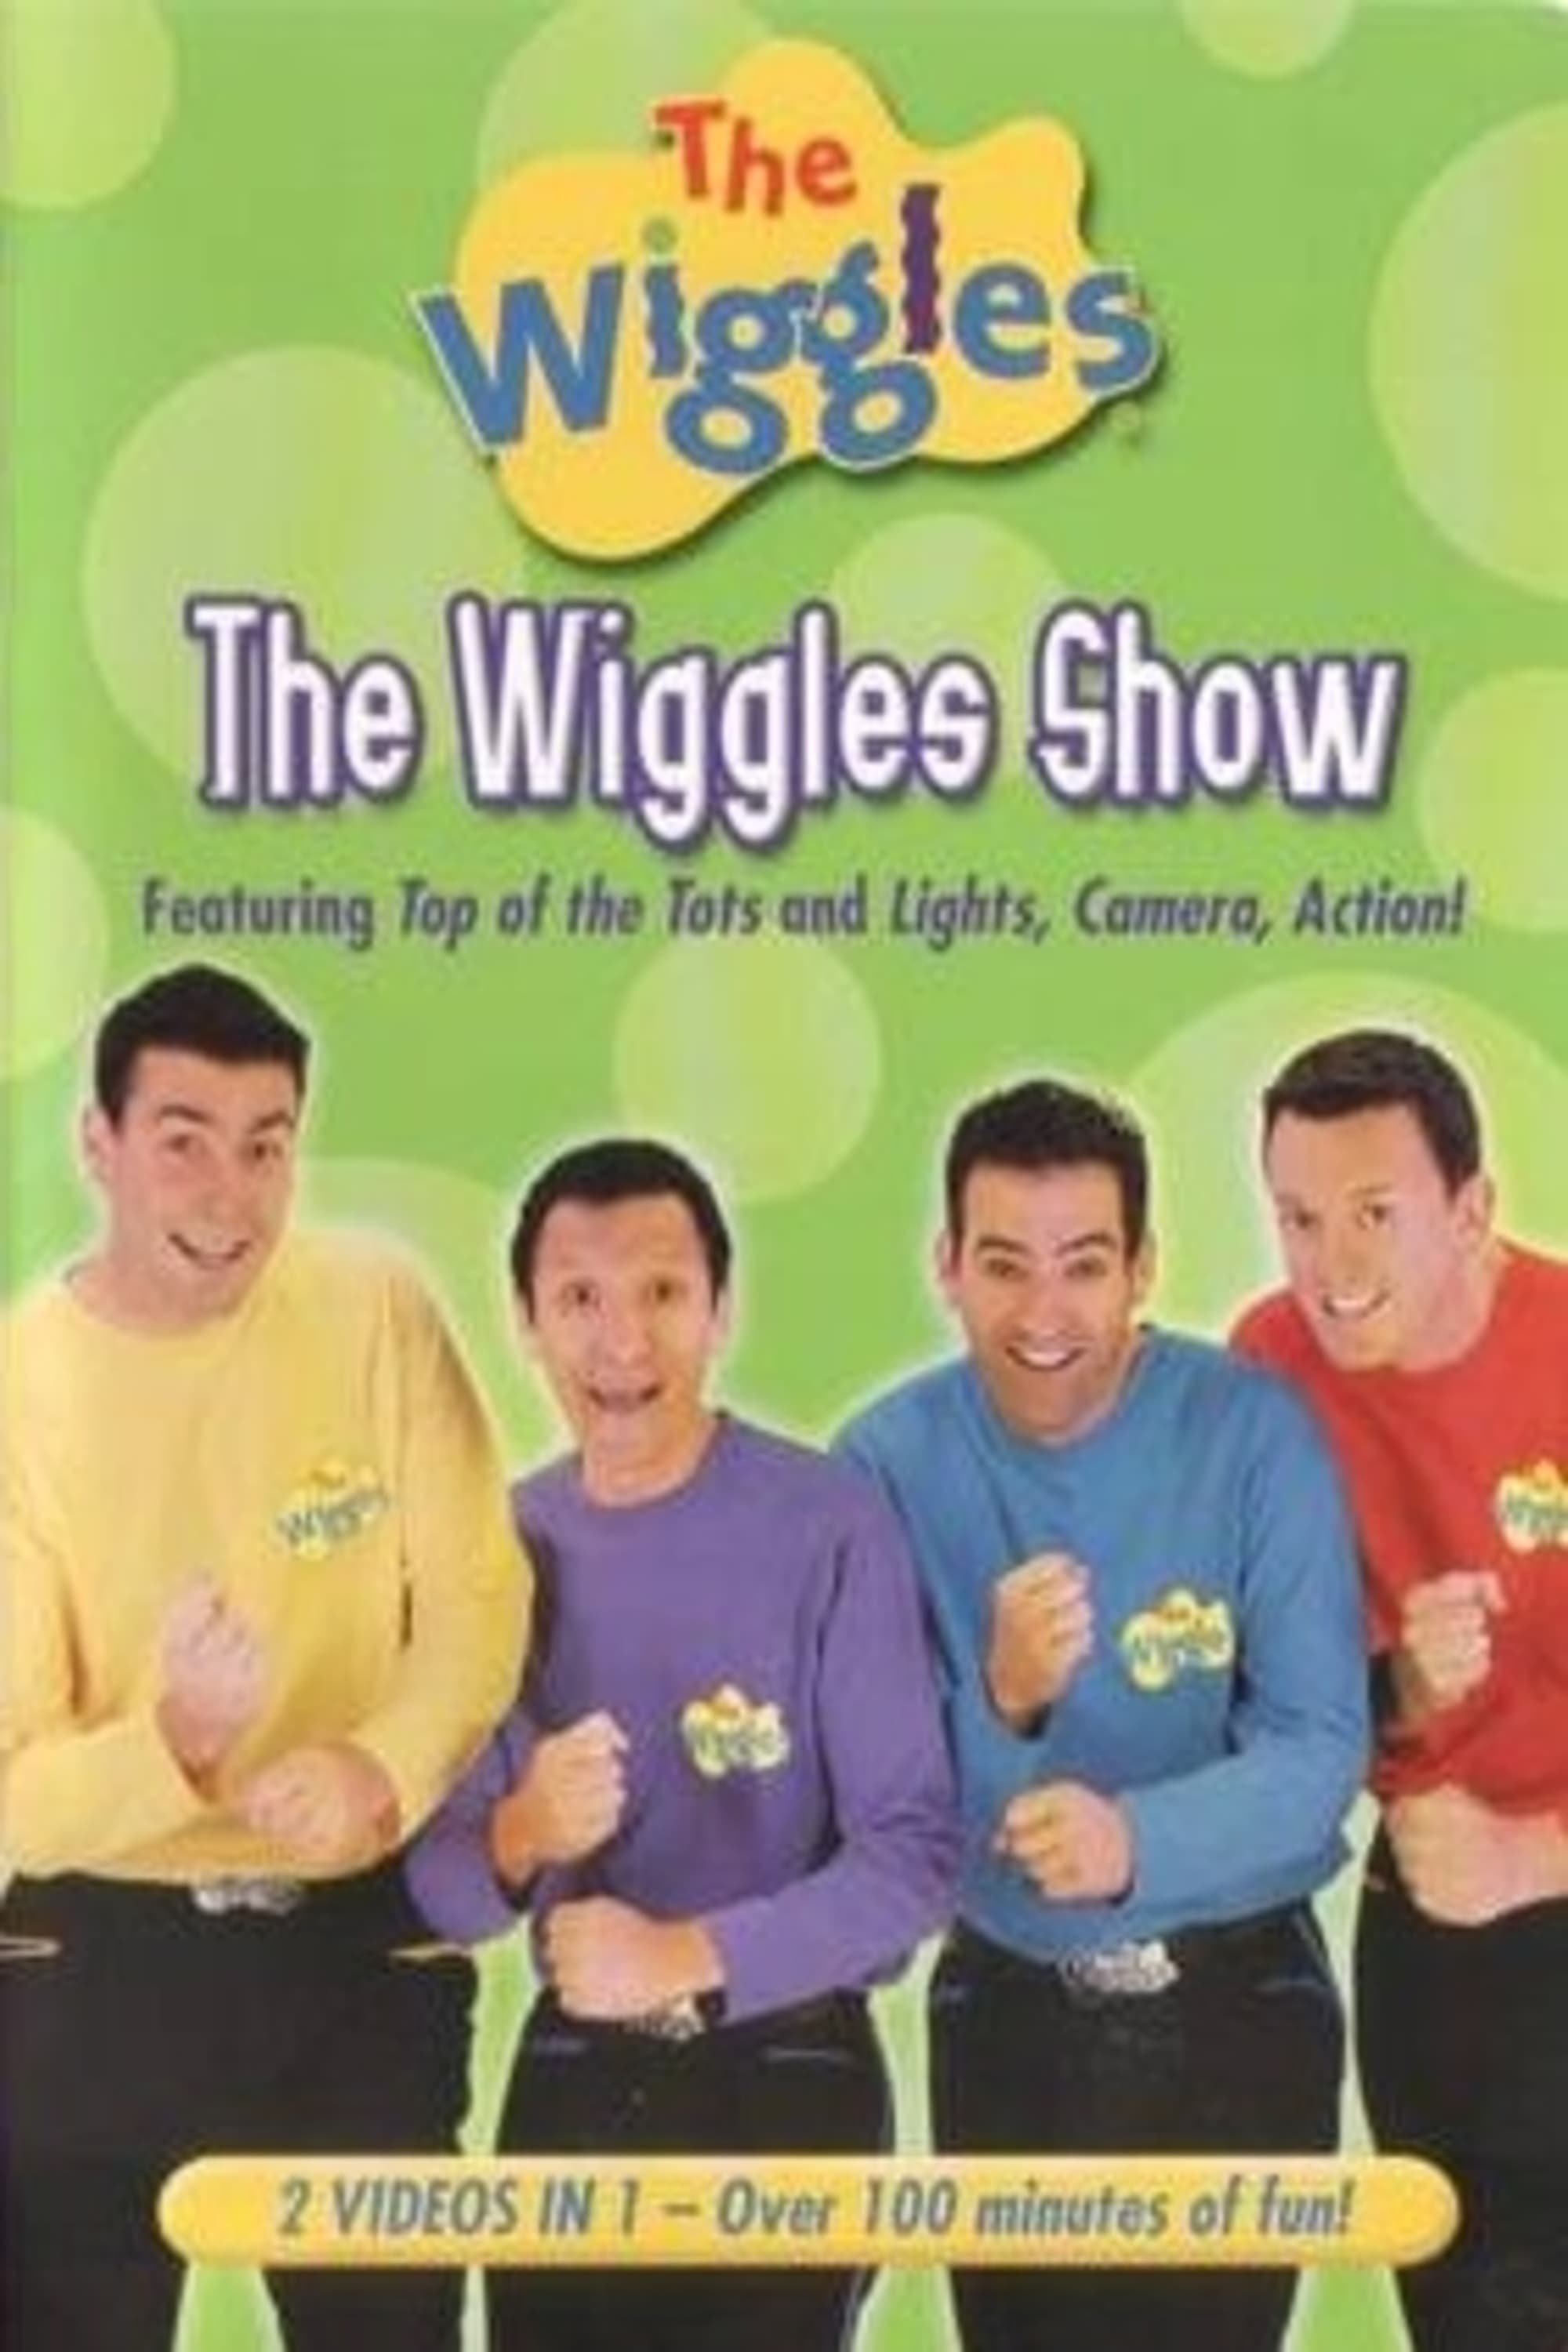 The Wiggles: The Wiggles Show